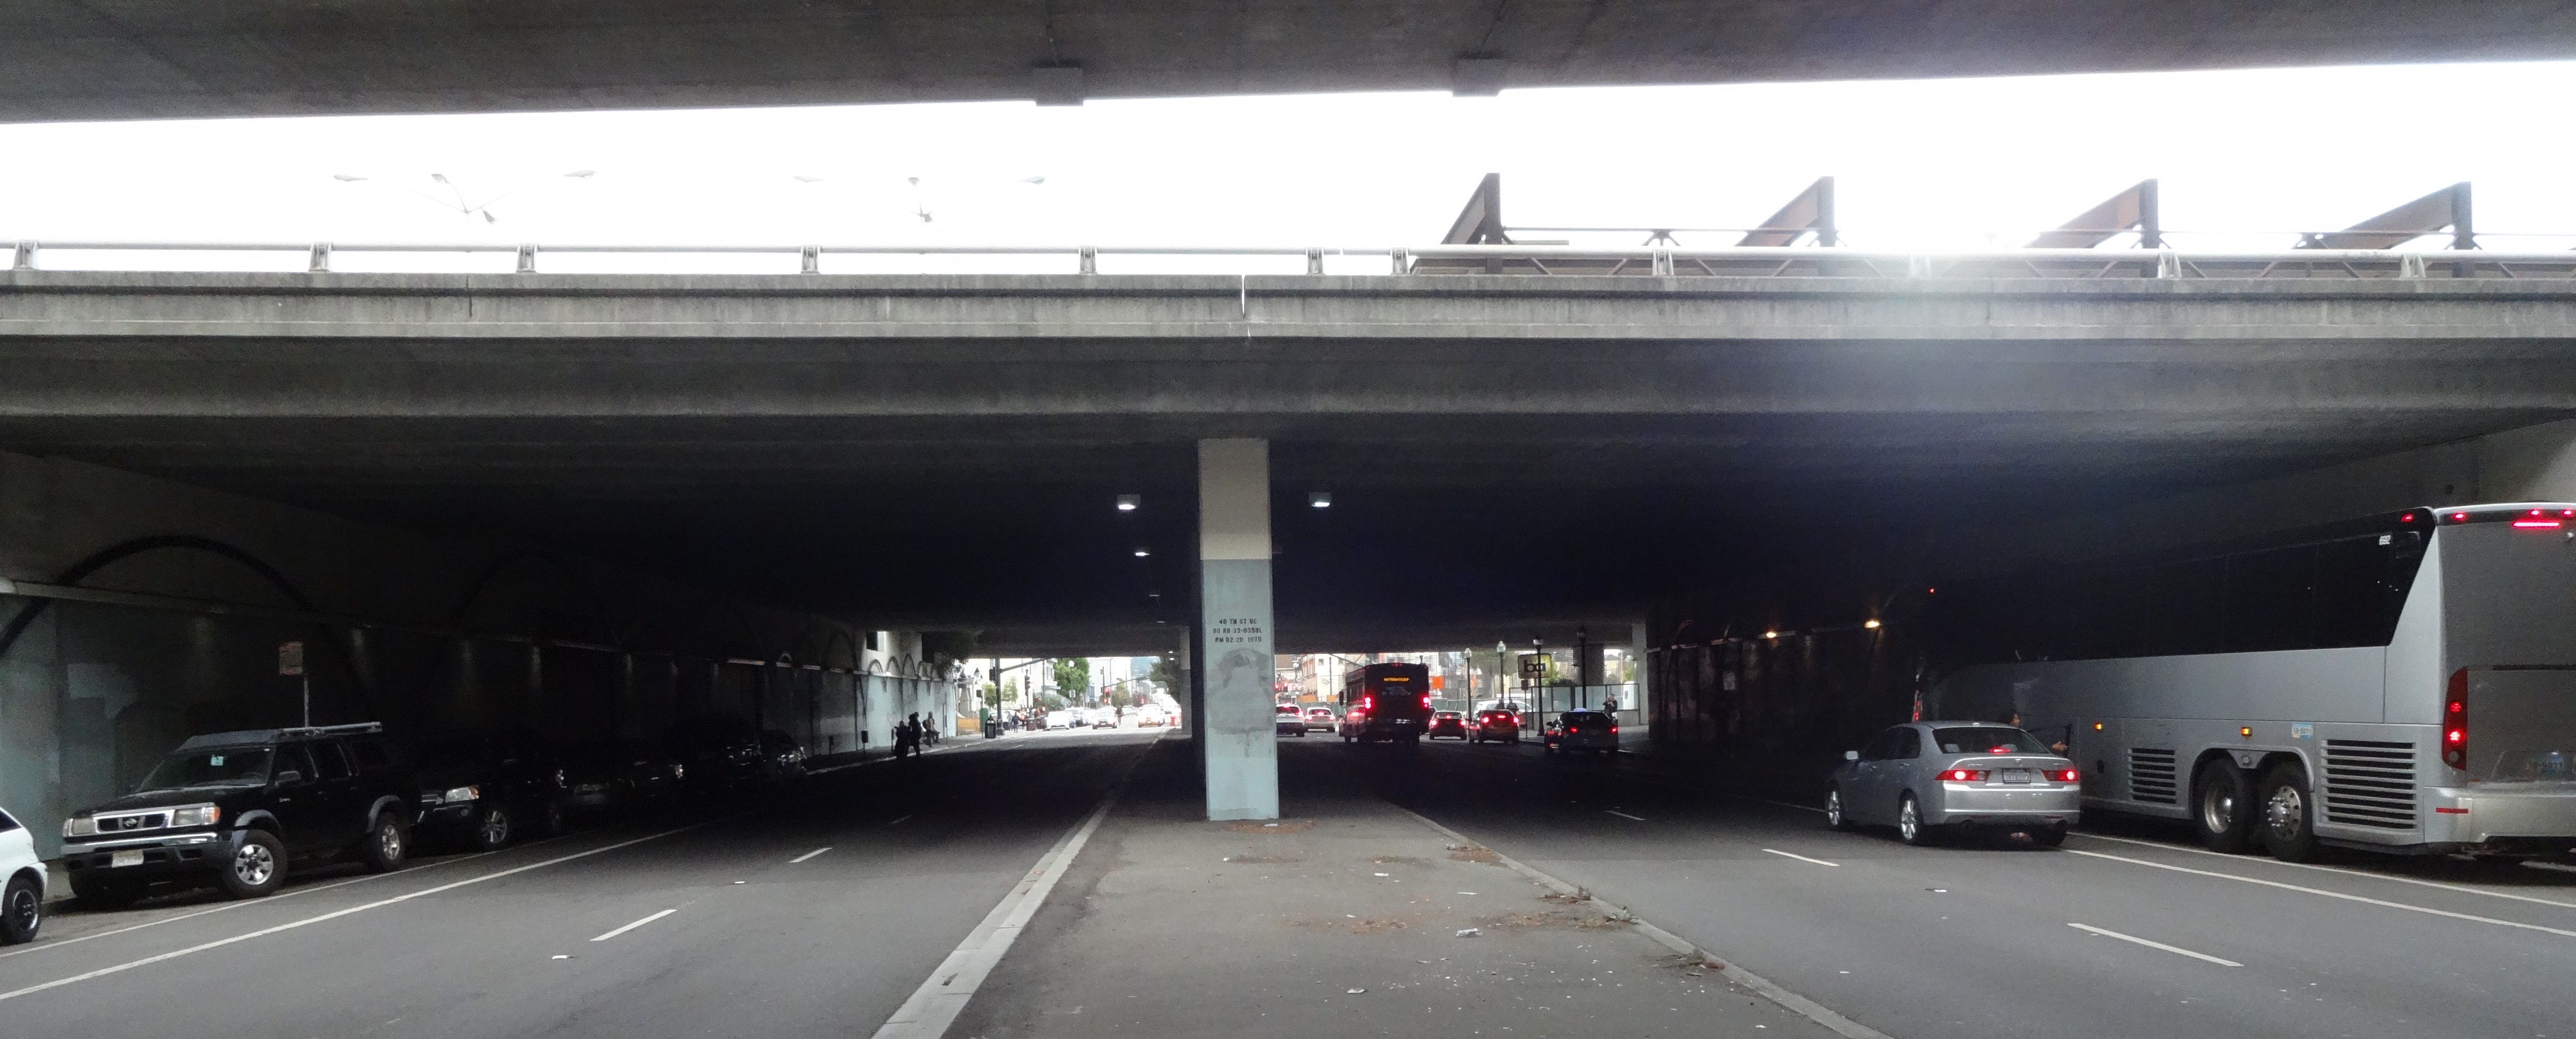 Image of the 40th Street underpass from the center median